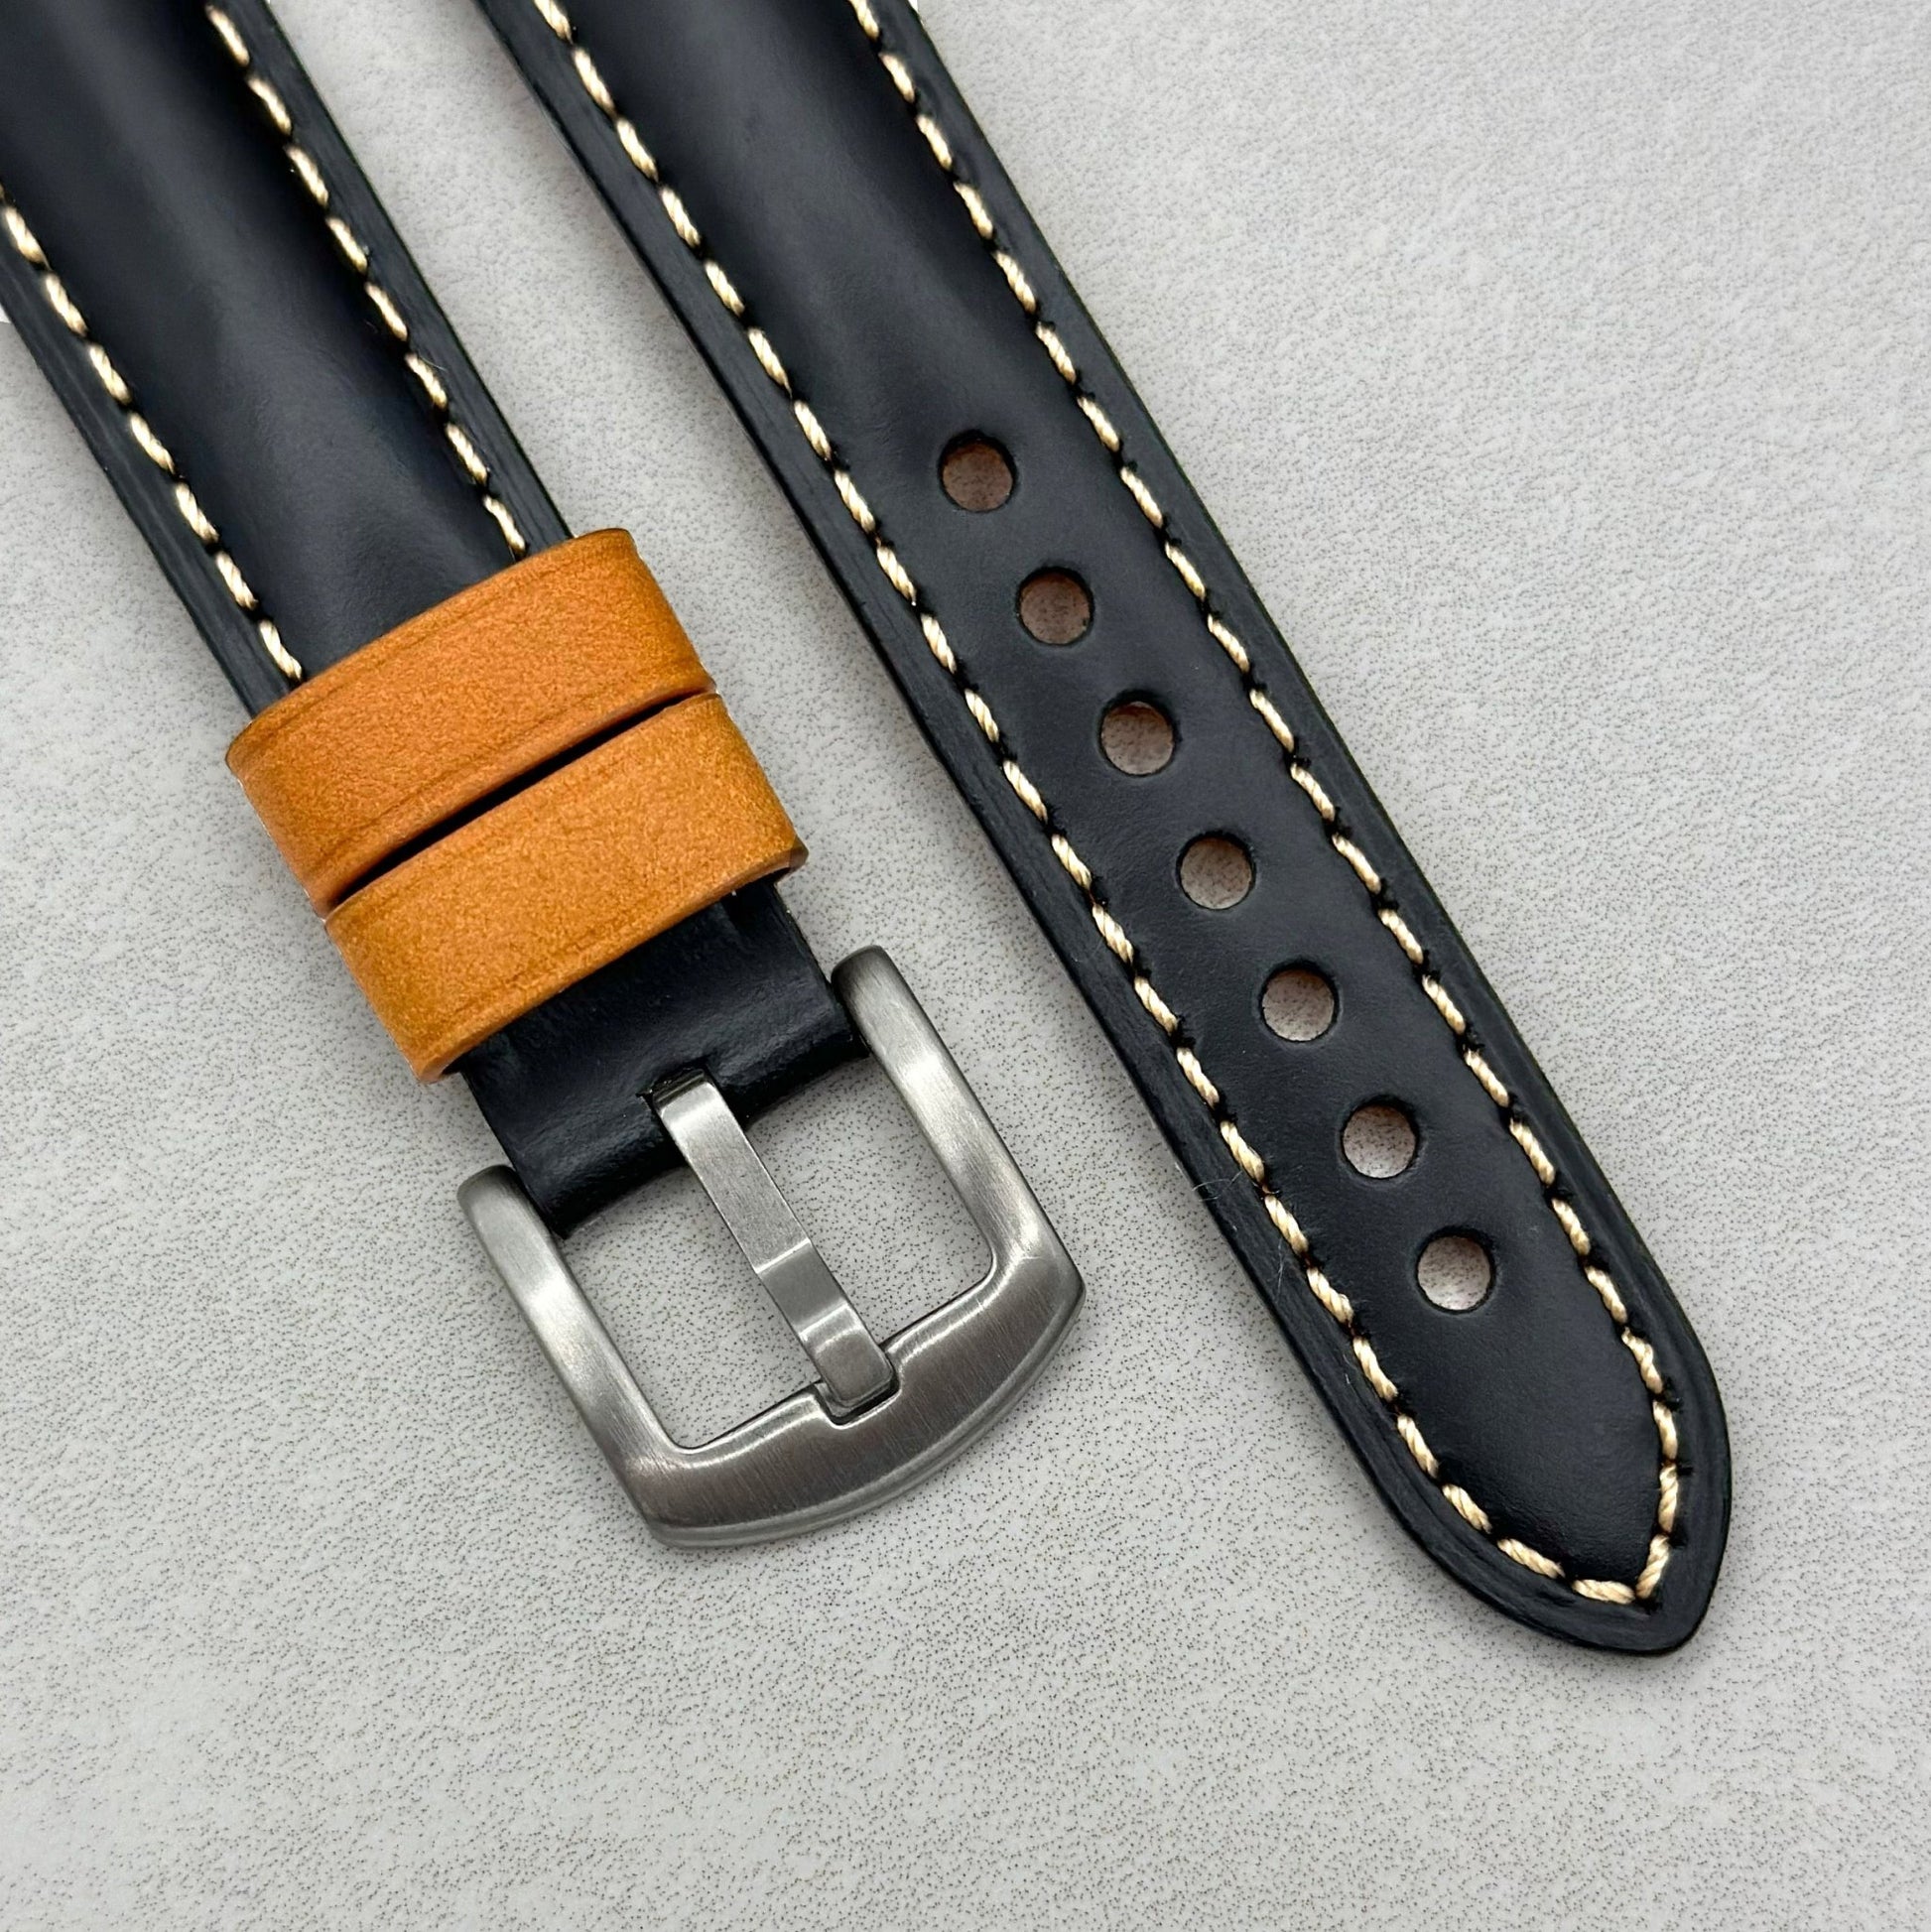 Brushed 316L stainless steel buckle on the Oxford jet black full grain leather Fitbit Charge watch strap.